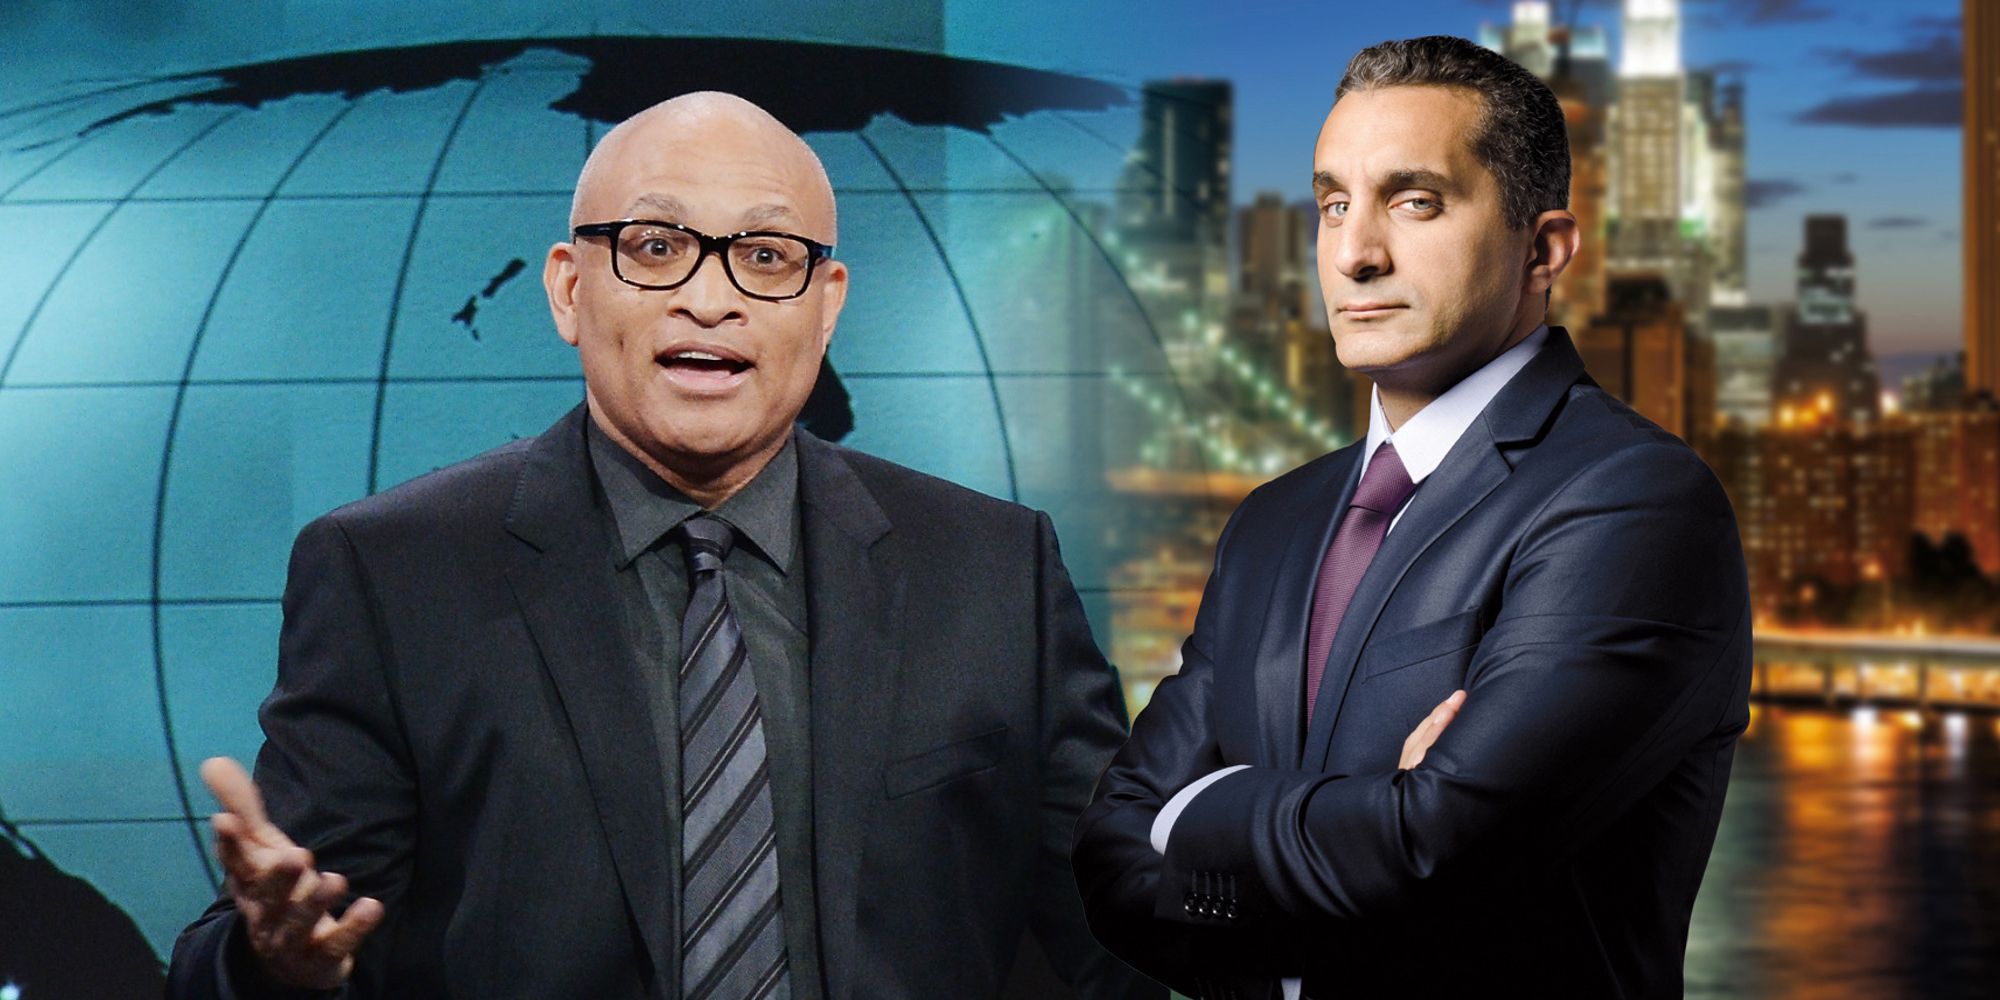 Larry Wilmore and Bassem Youssef Super Challenged Heroes